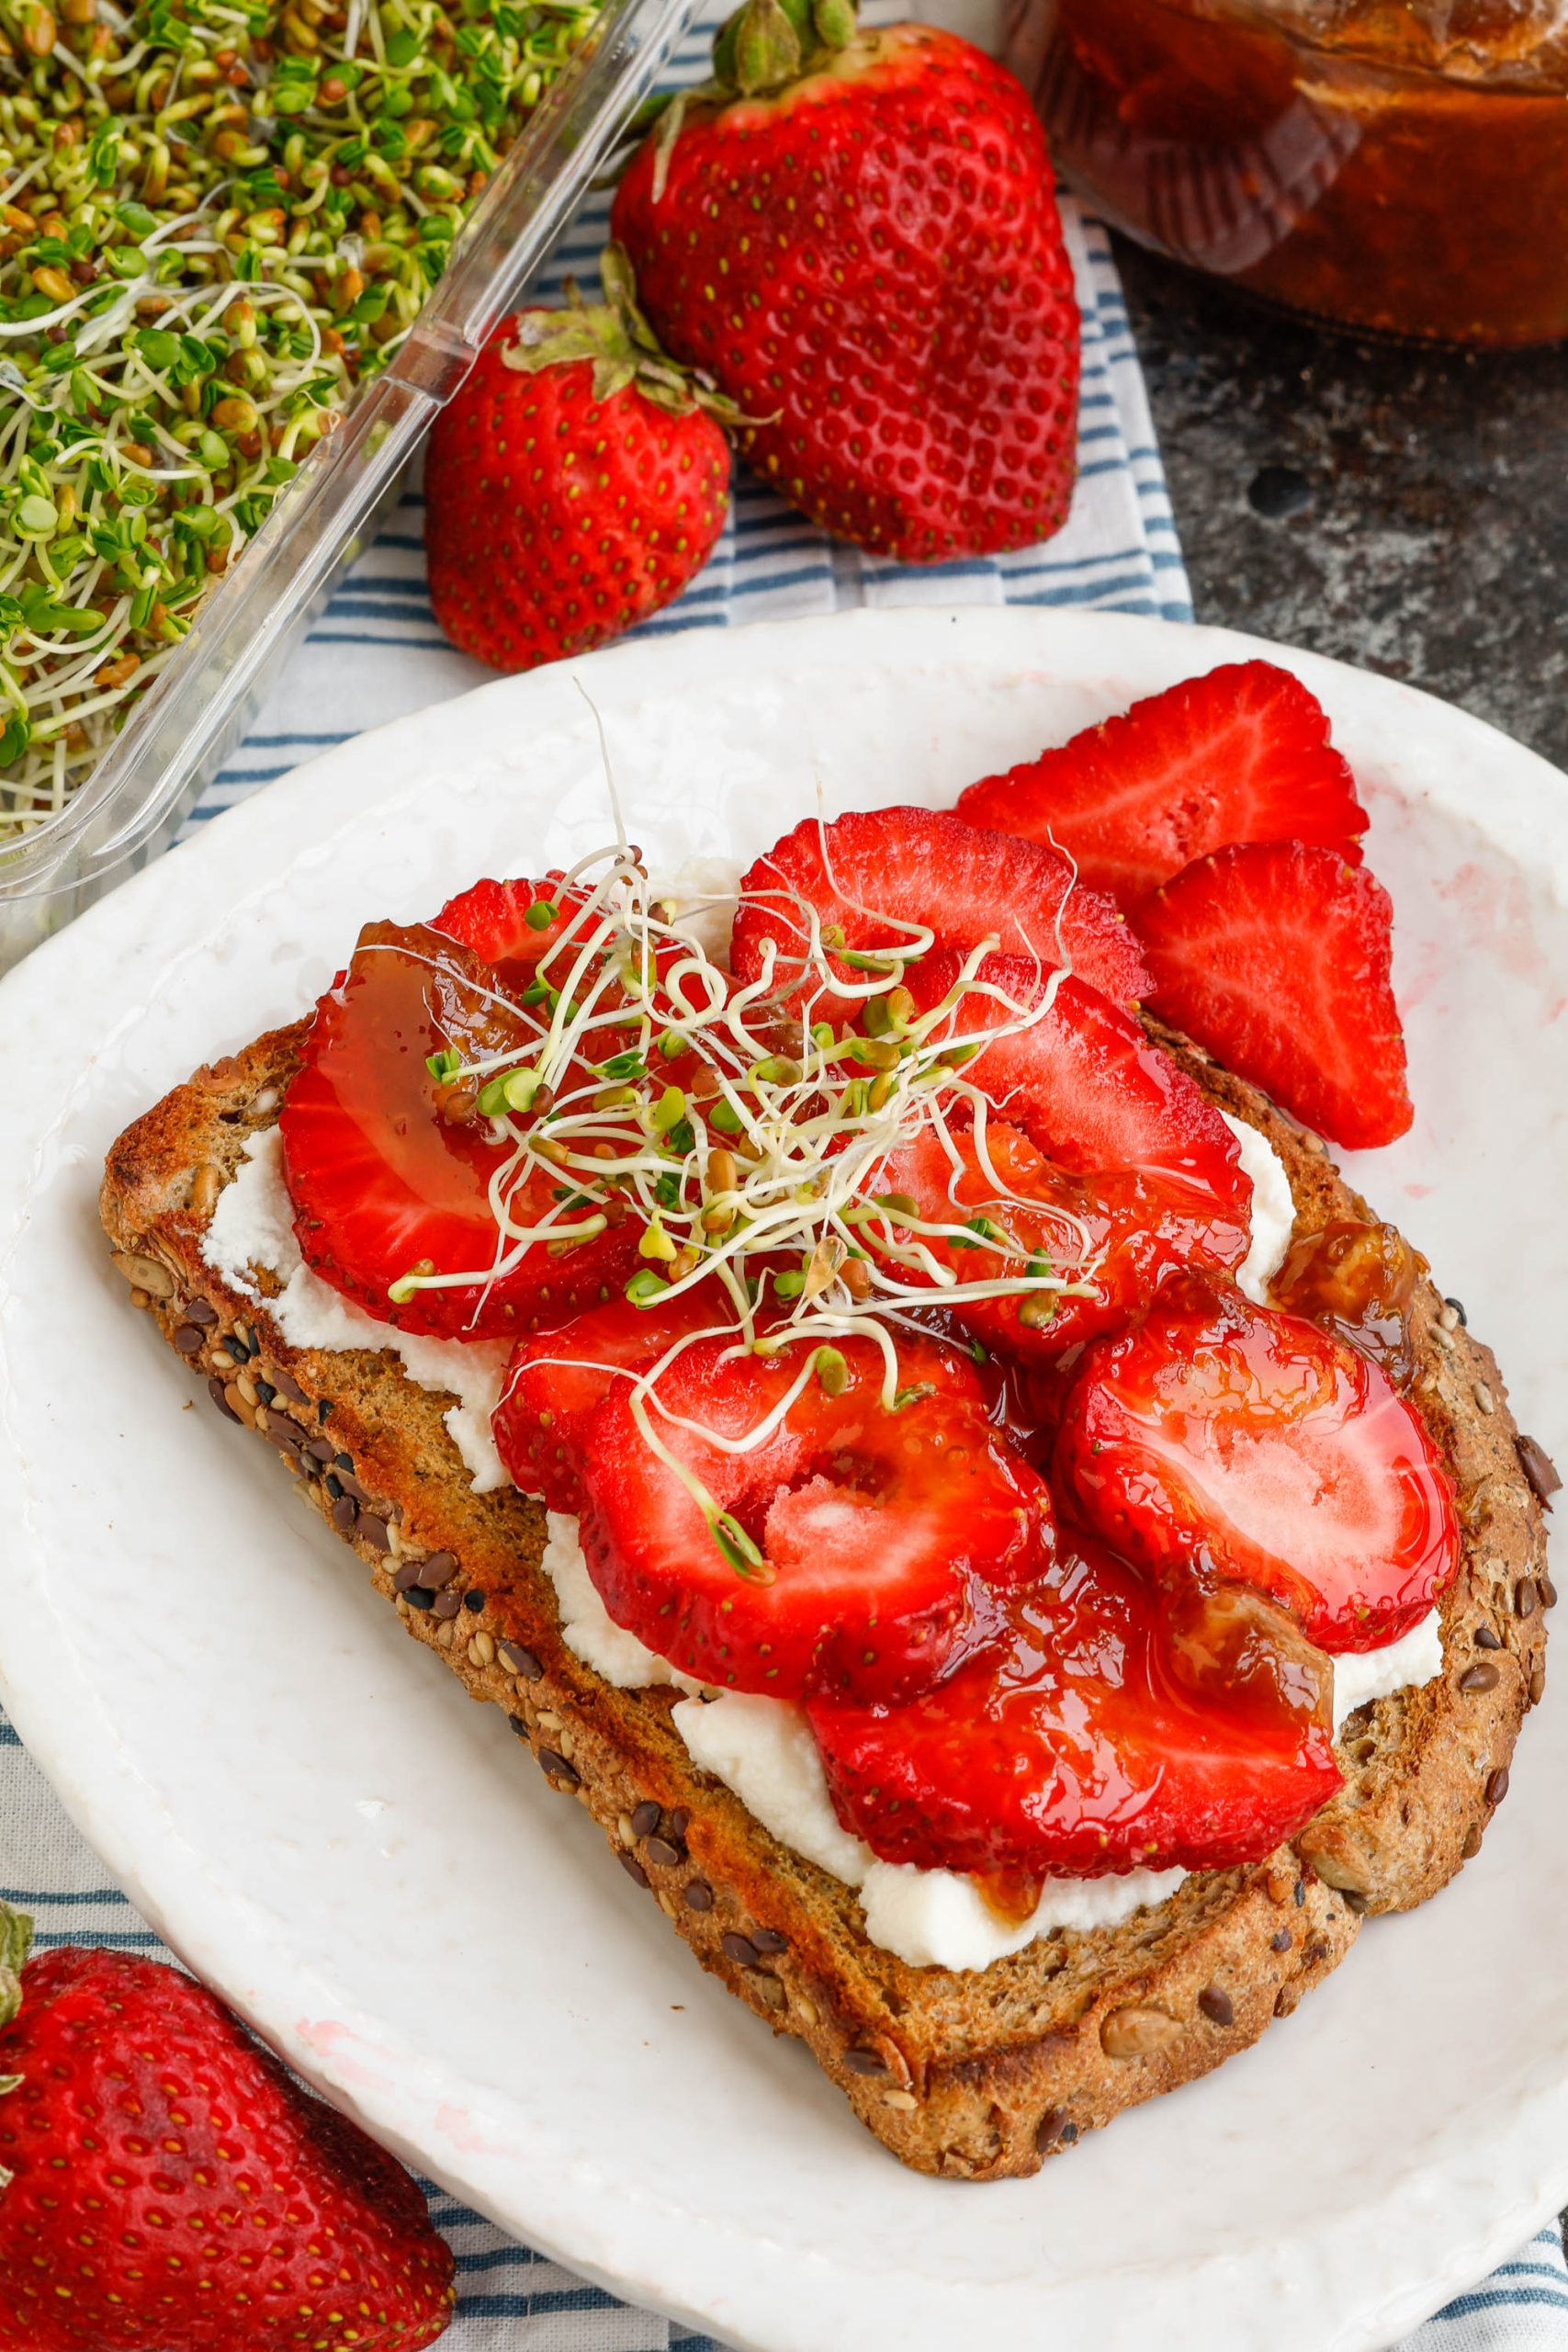 Strawberries, jam, and sprouts on toasted bread.